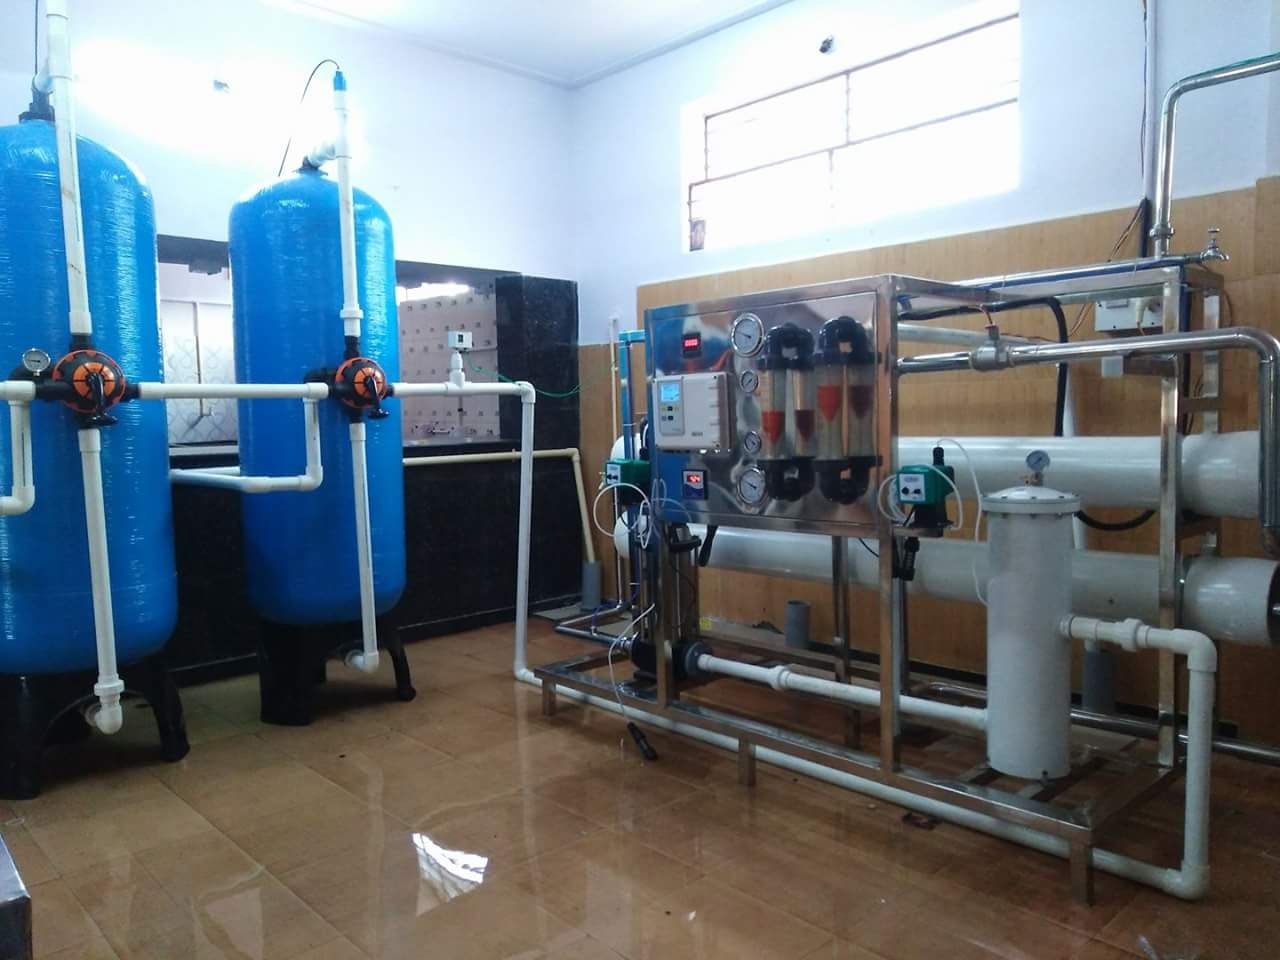 Commercial Reverse Osmosis System